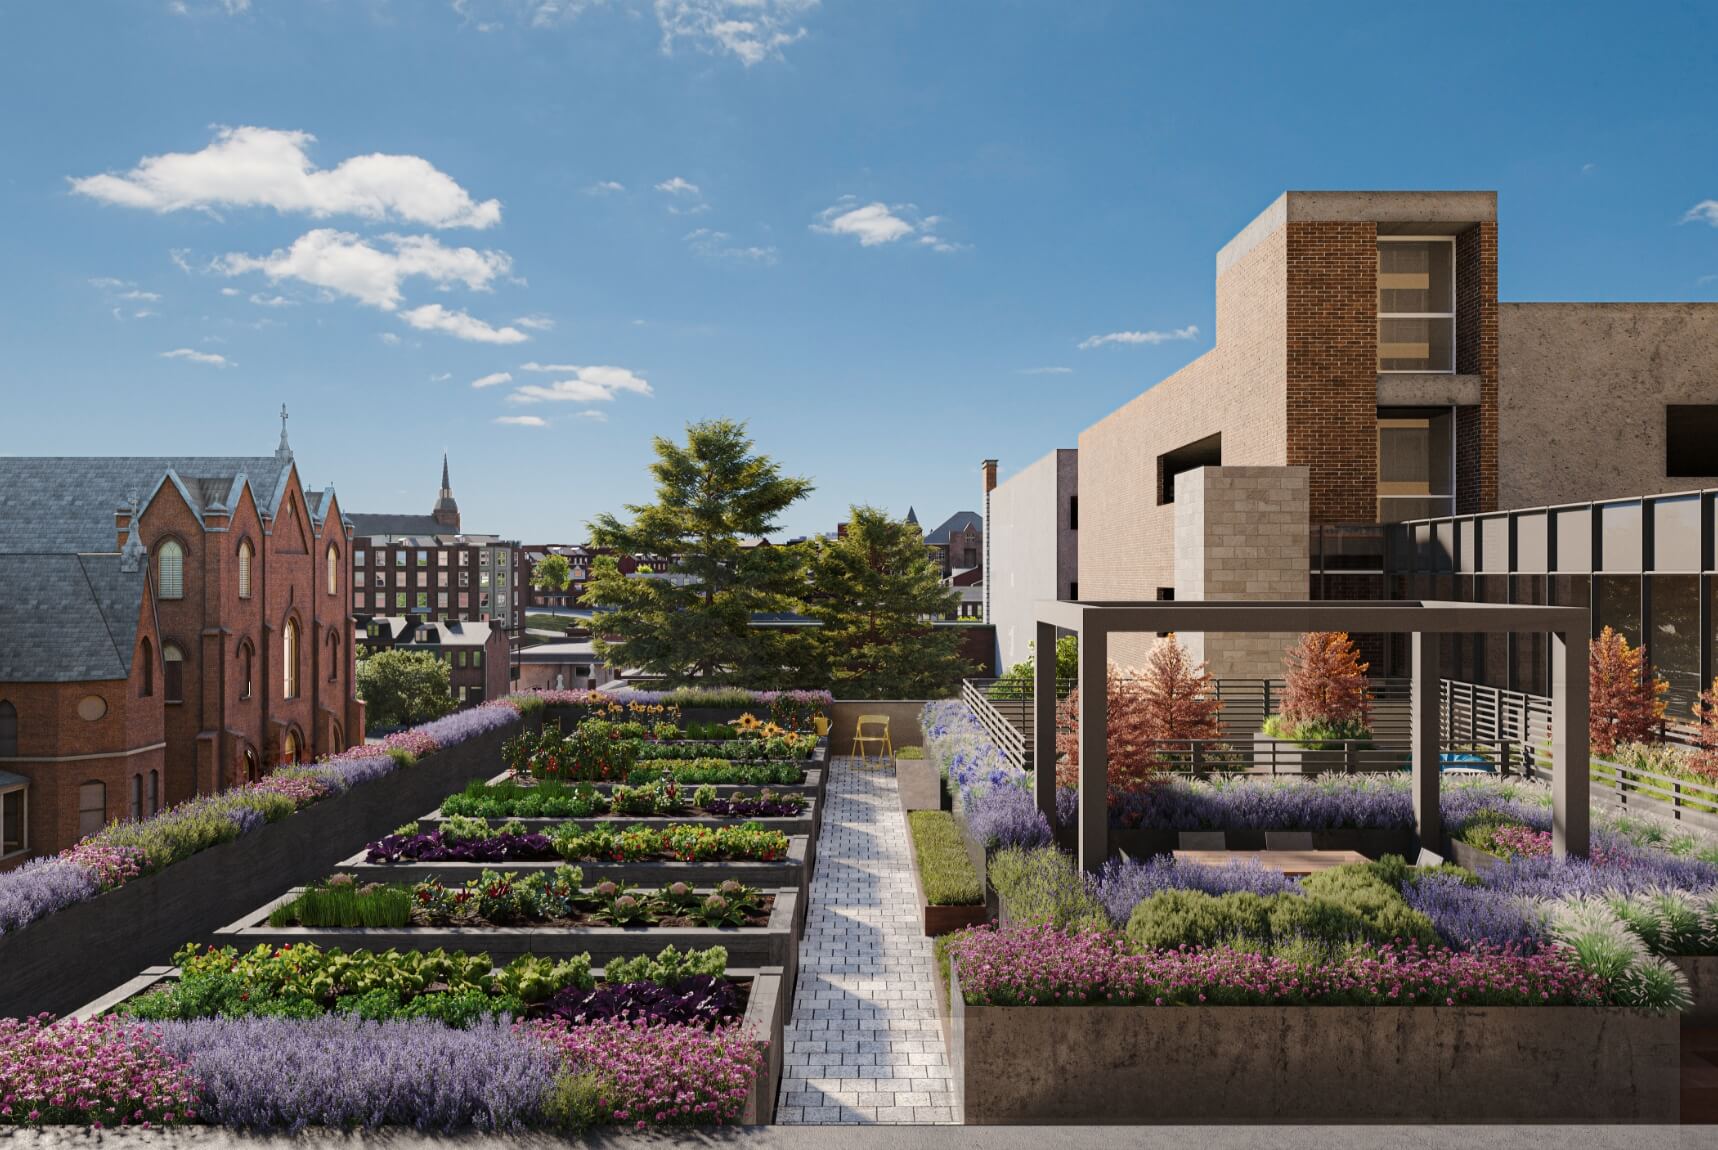 An artist's rendering of a rooftop garden in a Retirement Community.